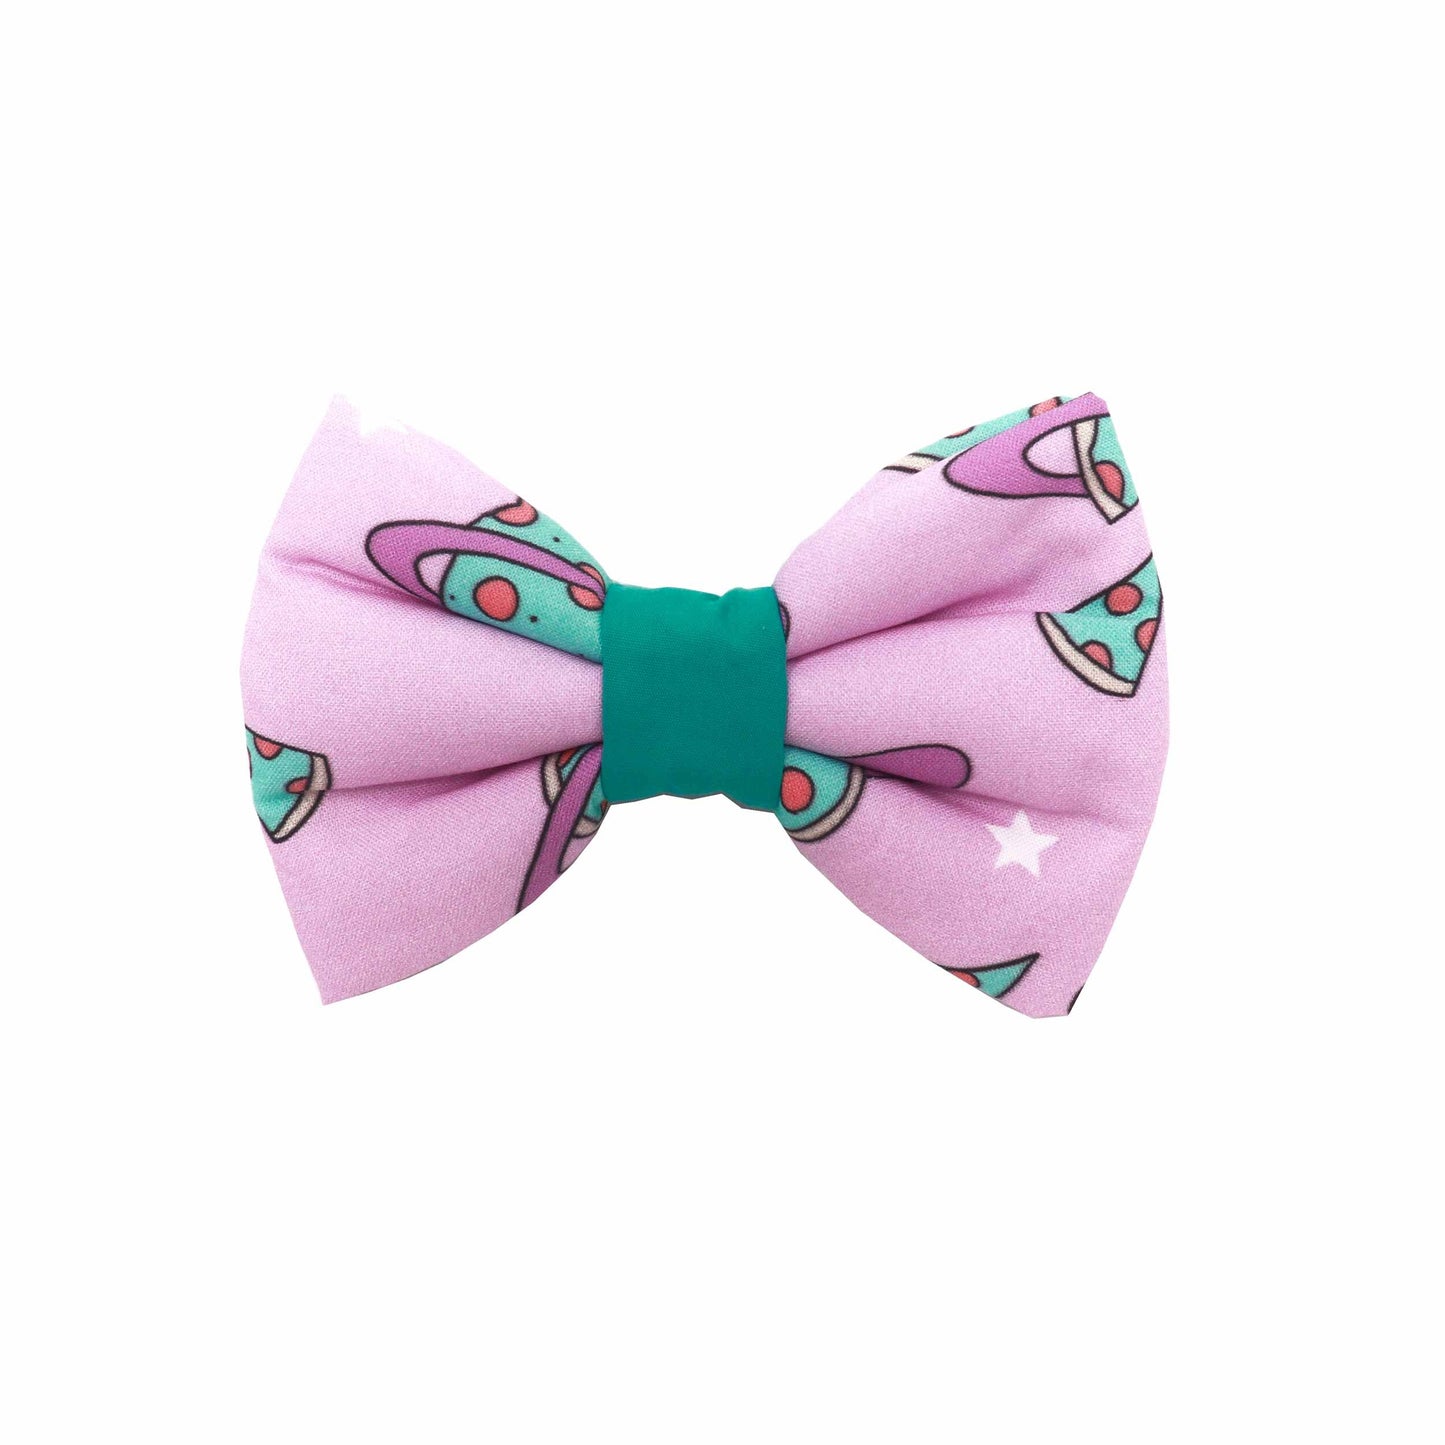 "Pizza Planet" Bow Tie